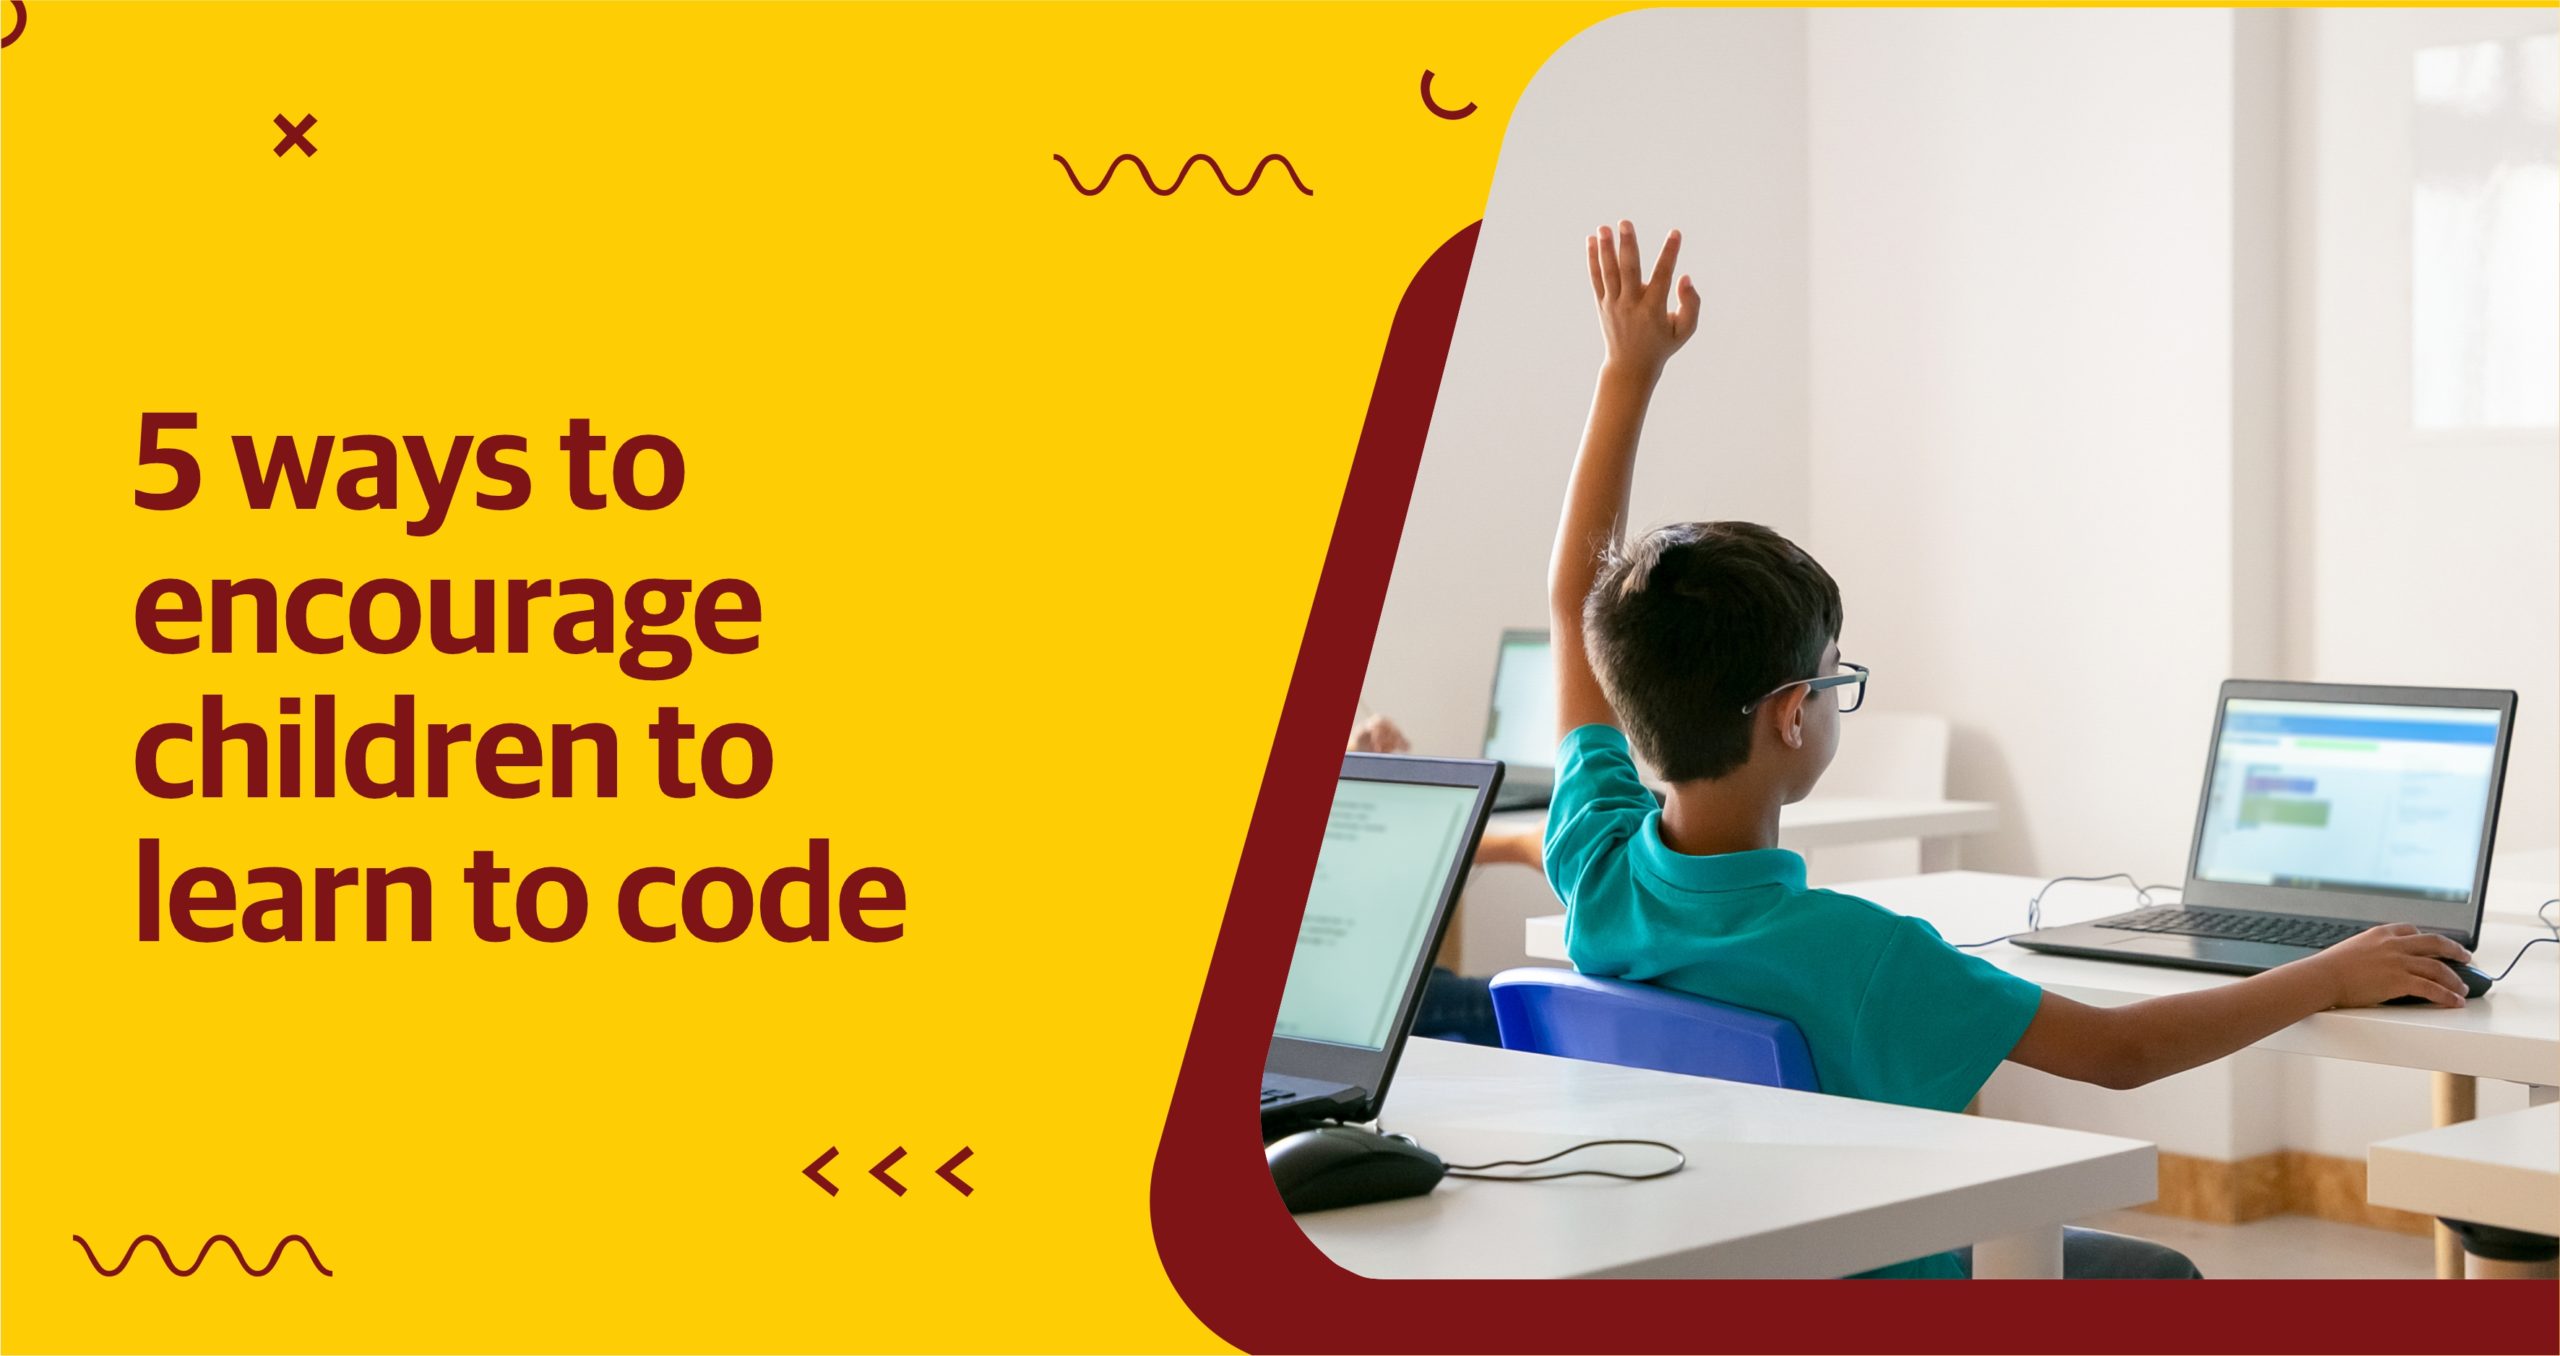 5 ways to encourage children to learn to code